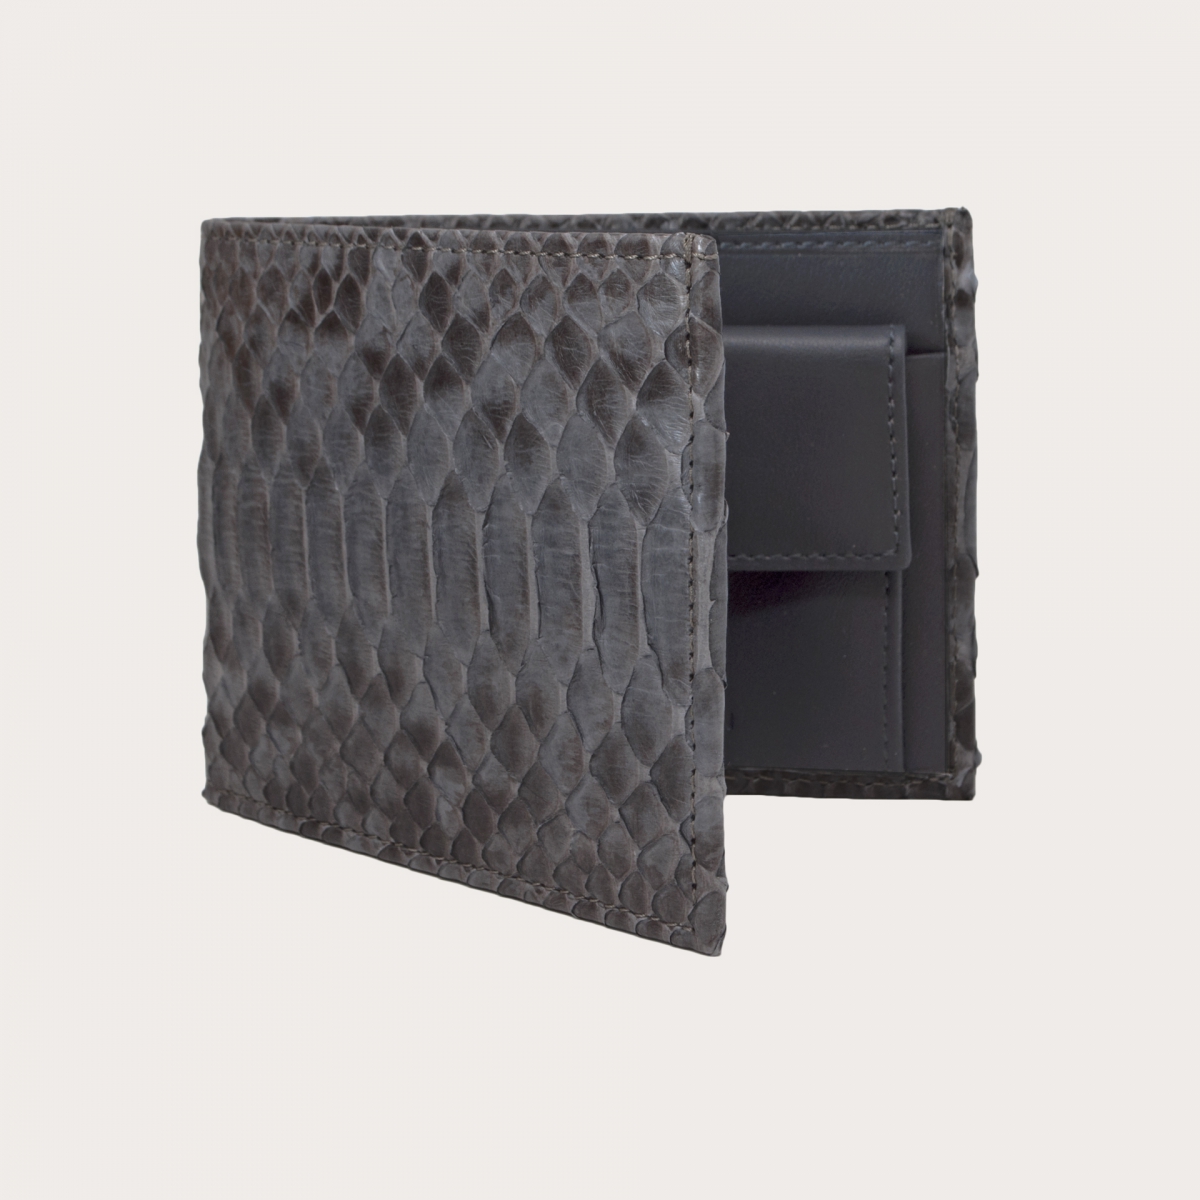 BRUCLE Python leather wallet in grey with coin purse